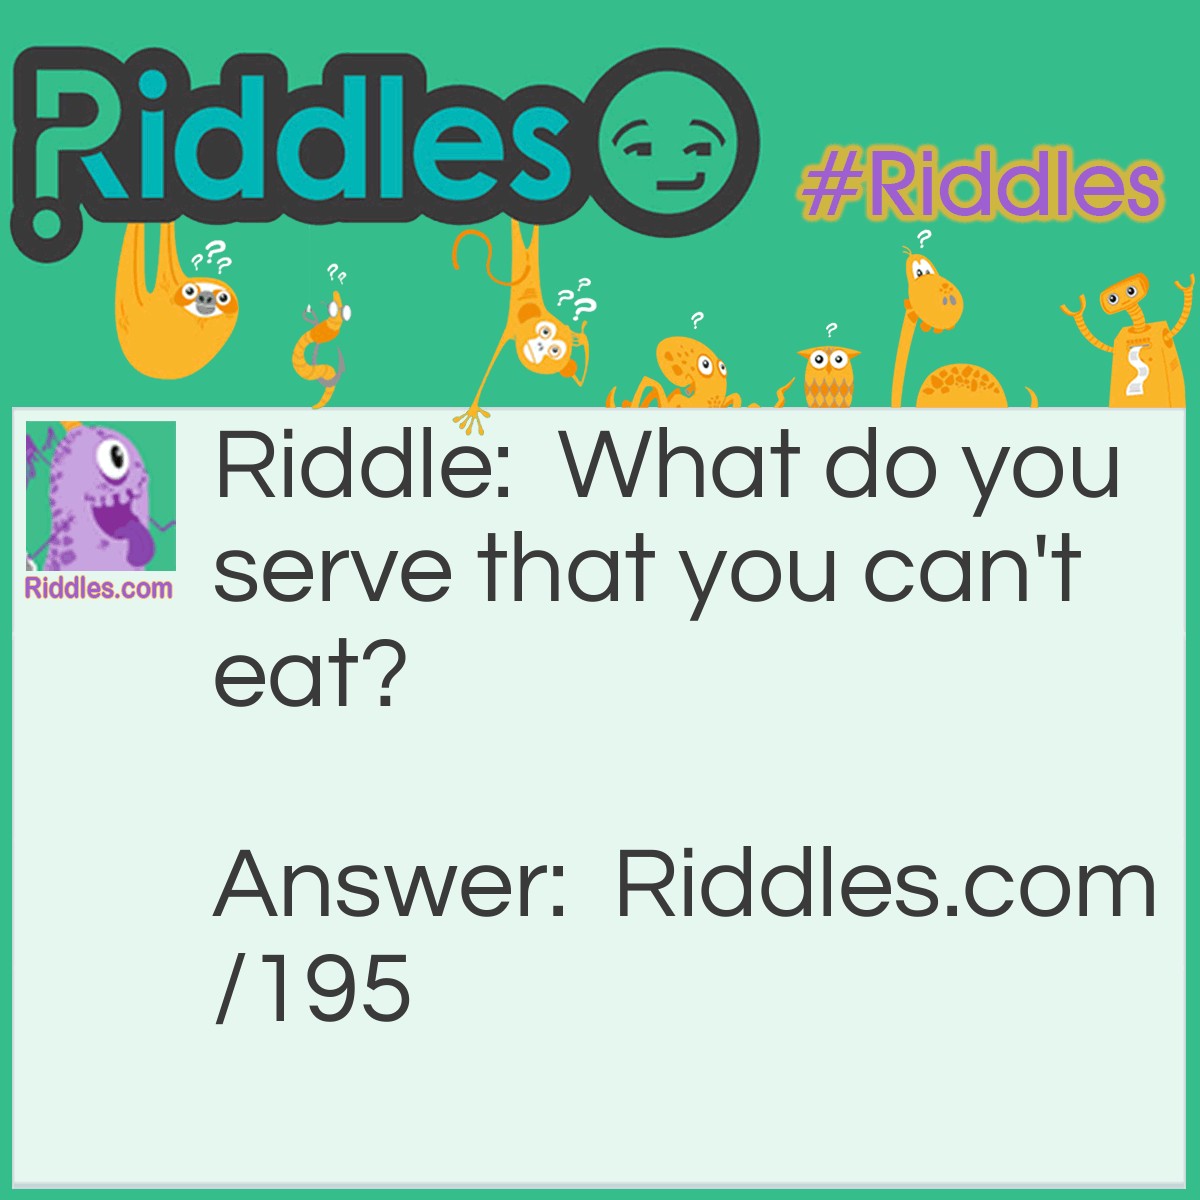 Riddle: What do you serve that you can't eat? Answer: A tennis ball.